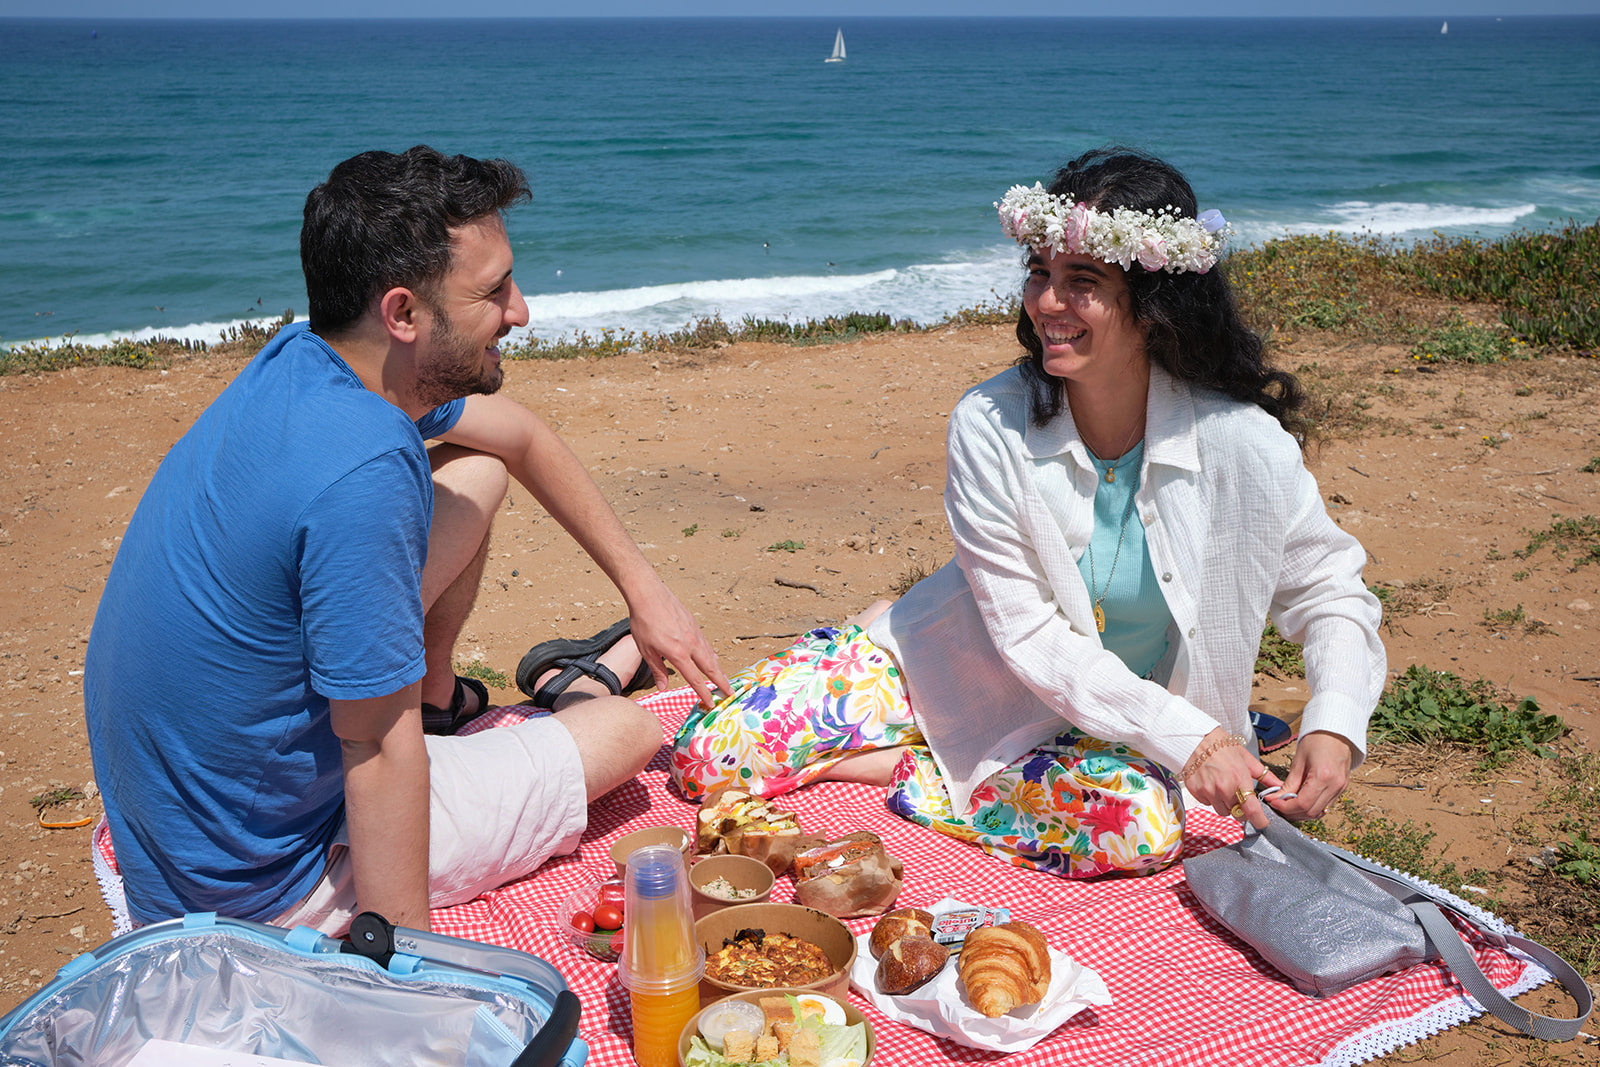 engaged couple having picnic by the beach flowers in her hair